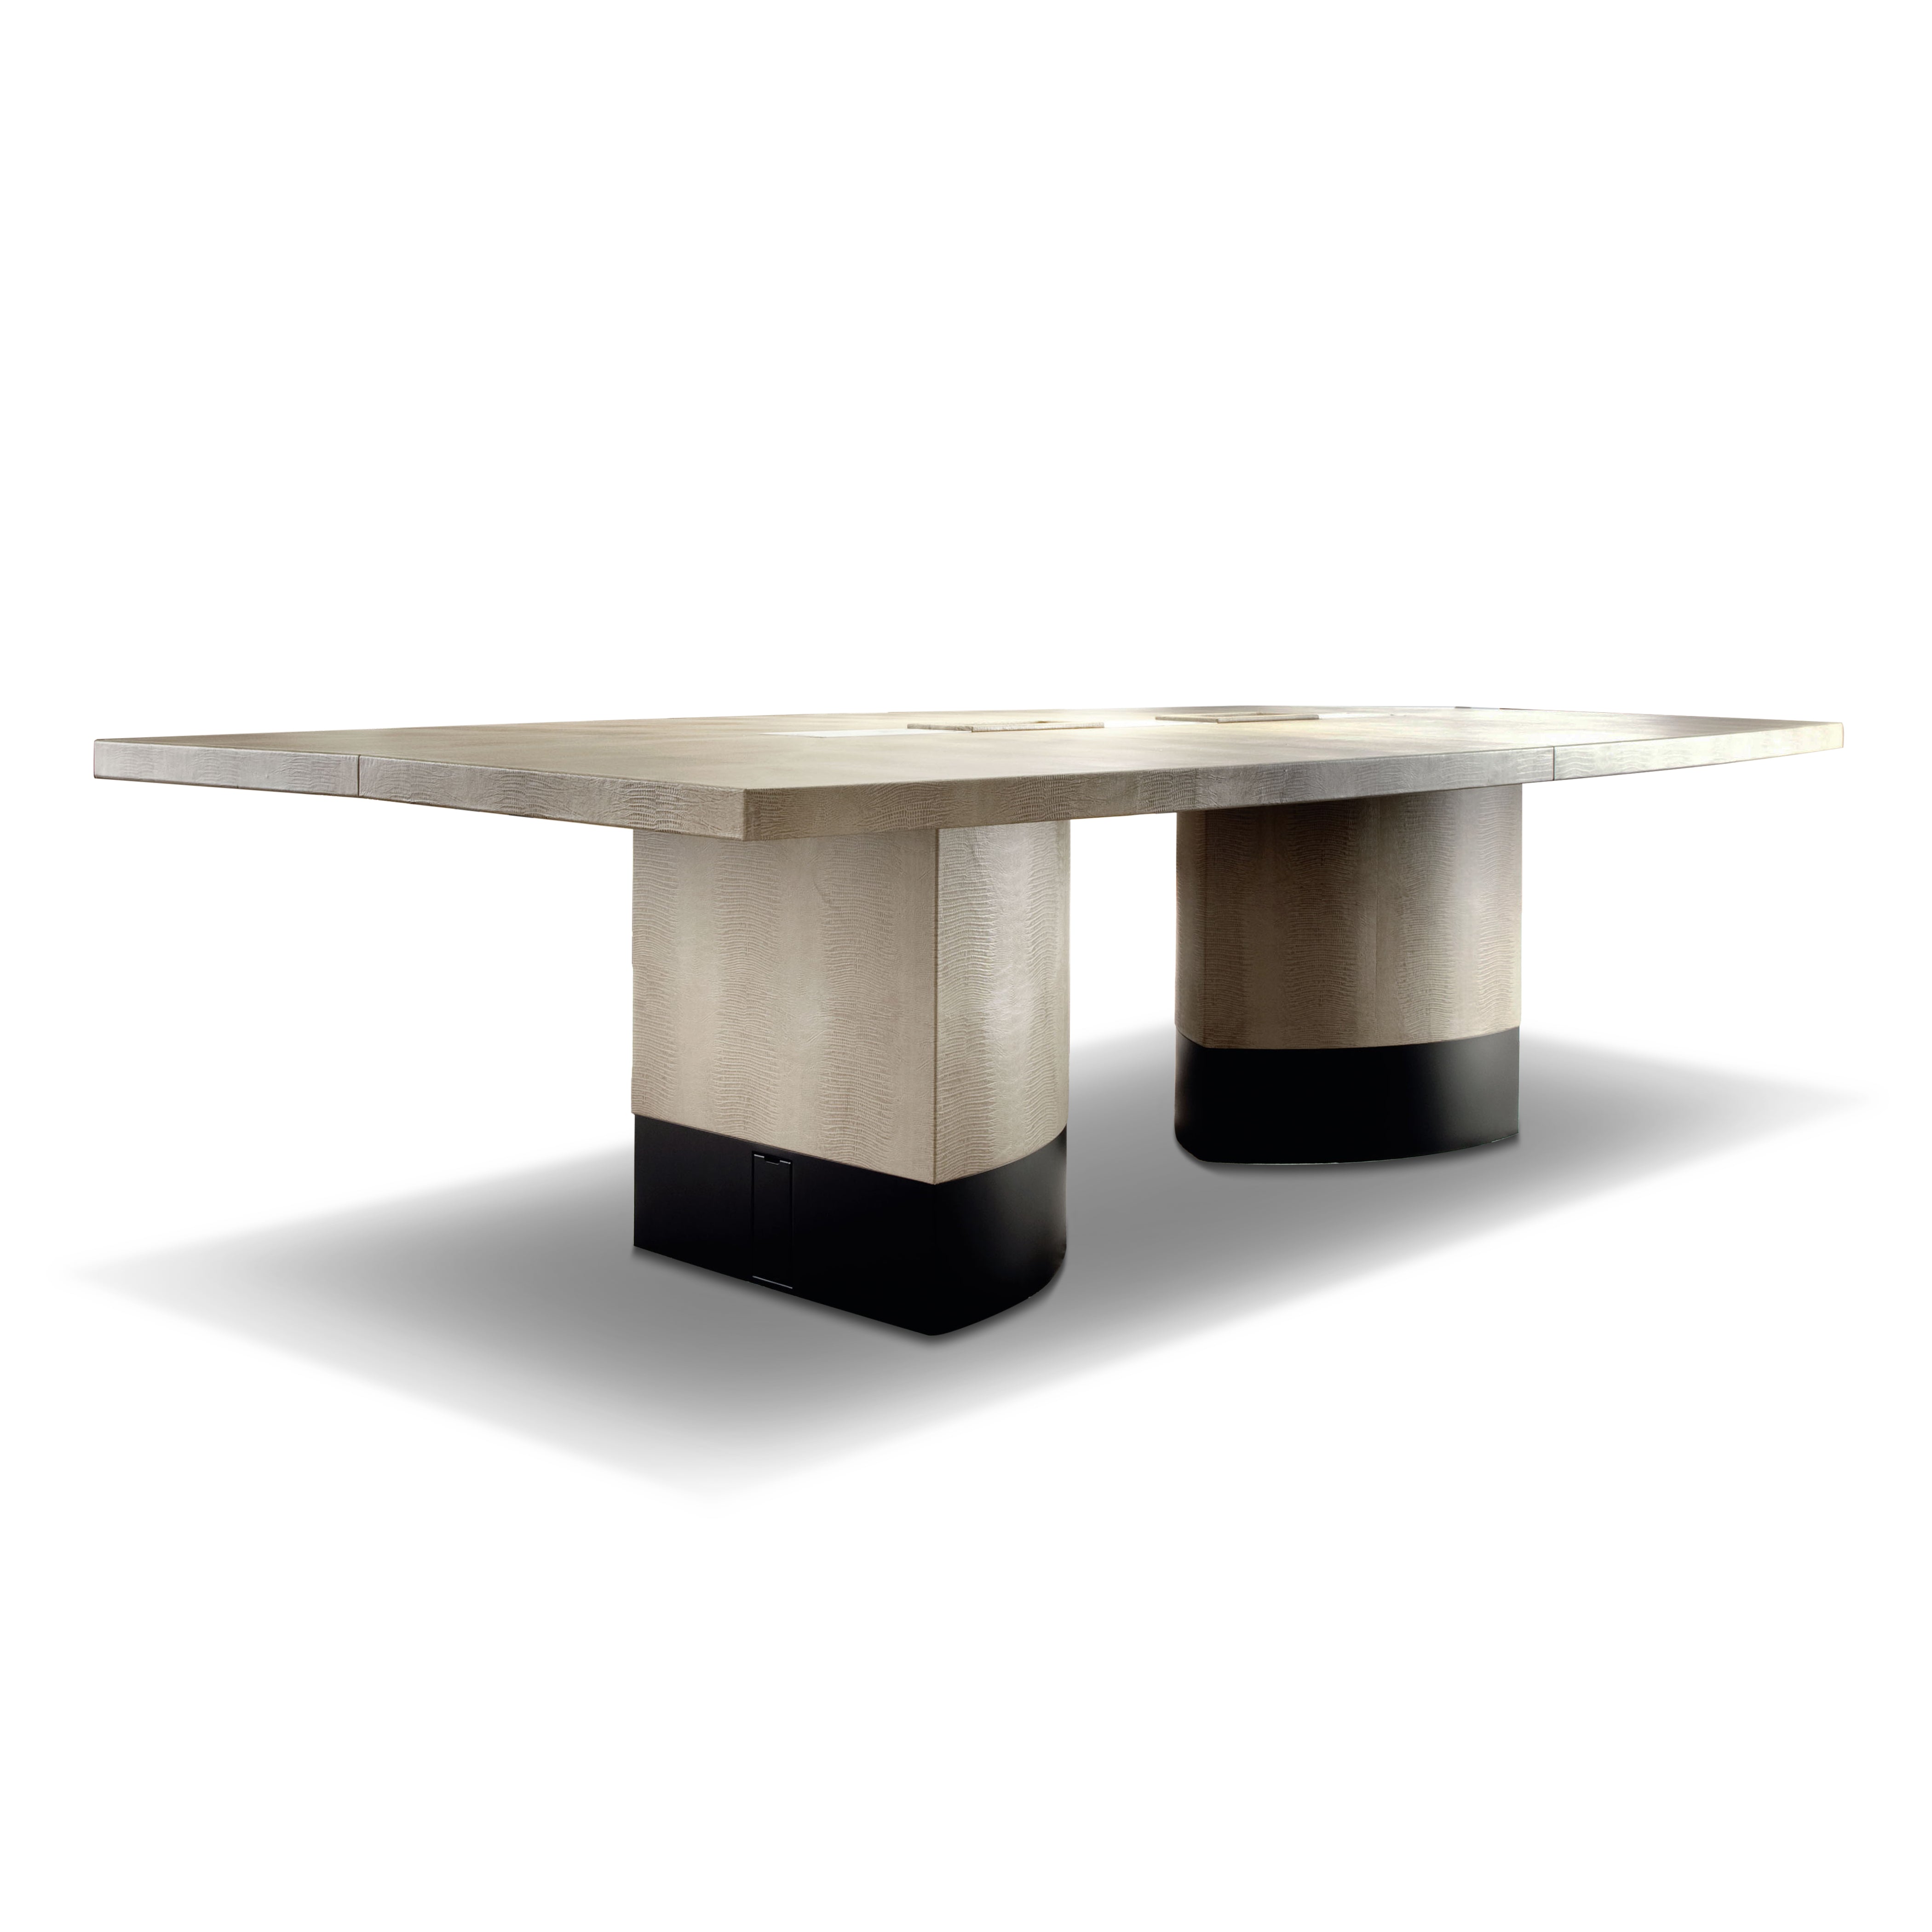 900-00 - Conference table